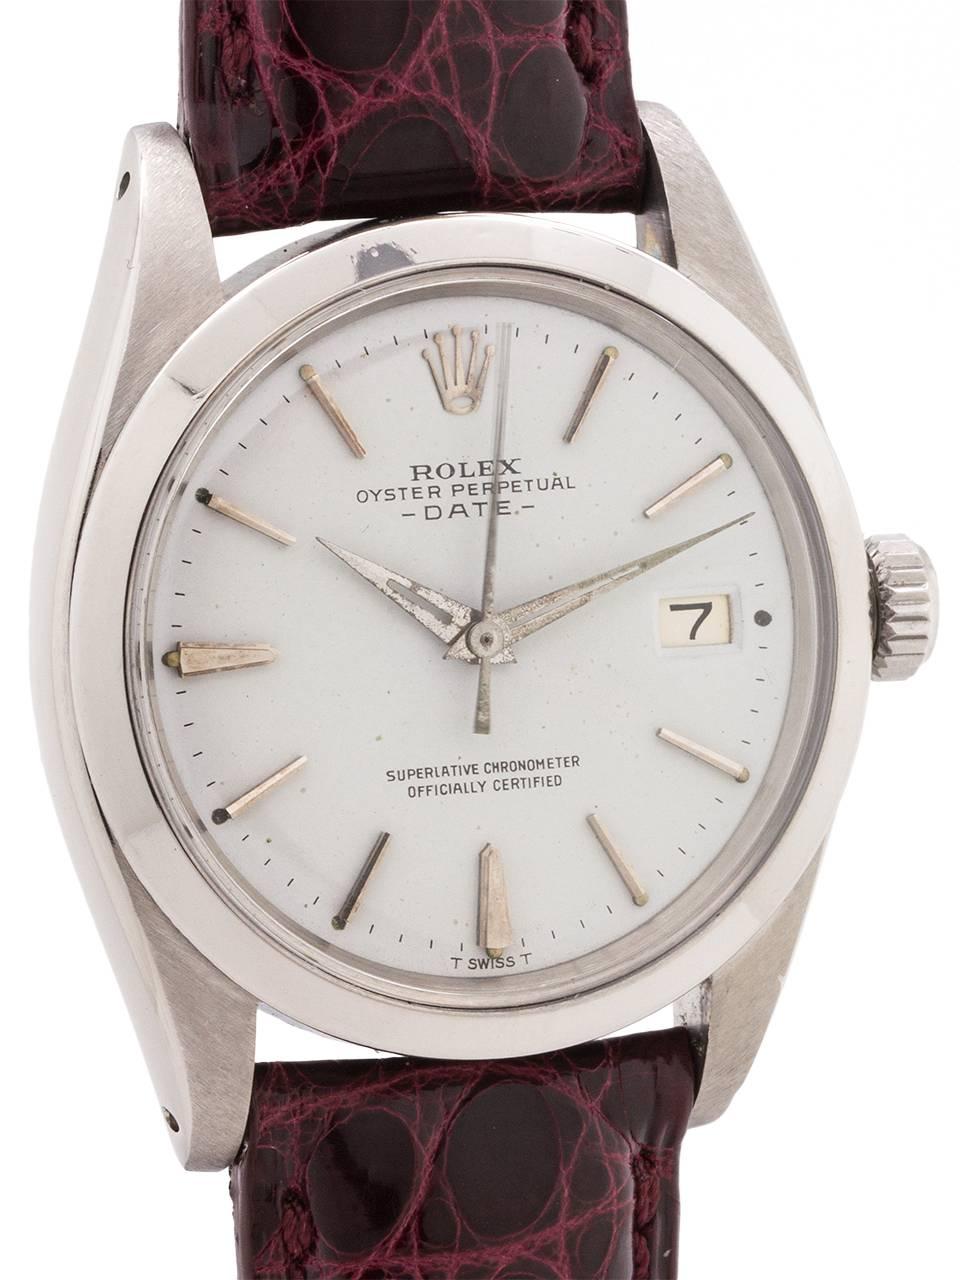 Rolex Stainless Steel Oyster Perpetual Date Self Winding Wristwatch Ref 1500 In Excellent Condition For Sale In West Hollywood, CA